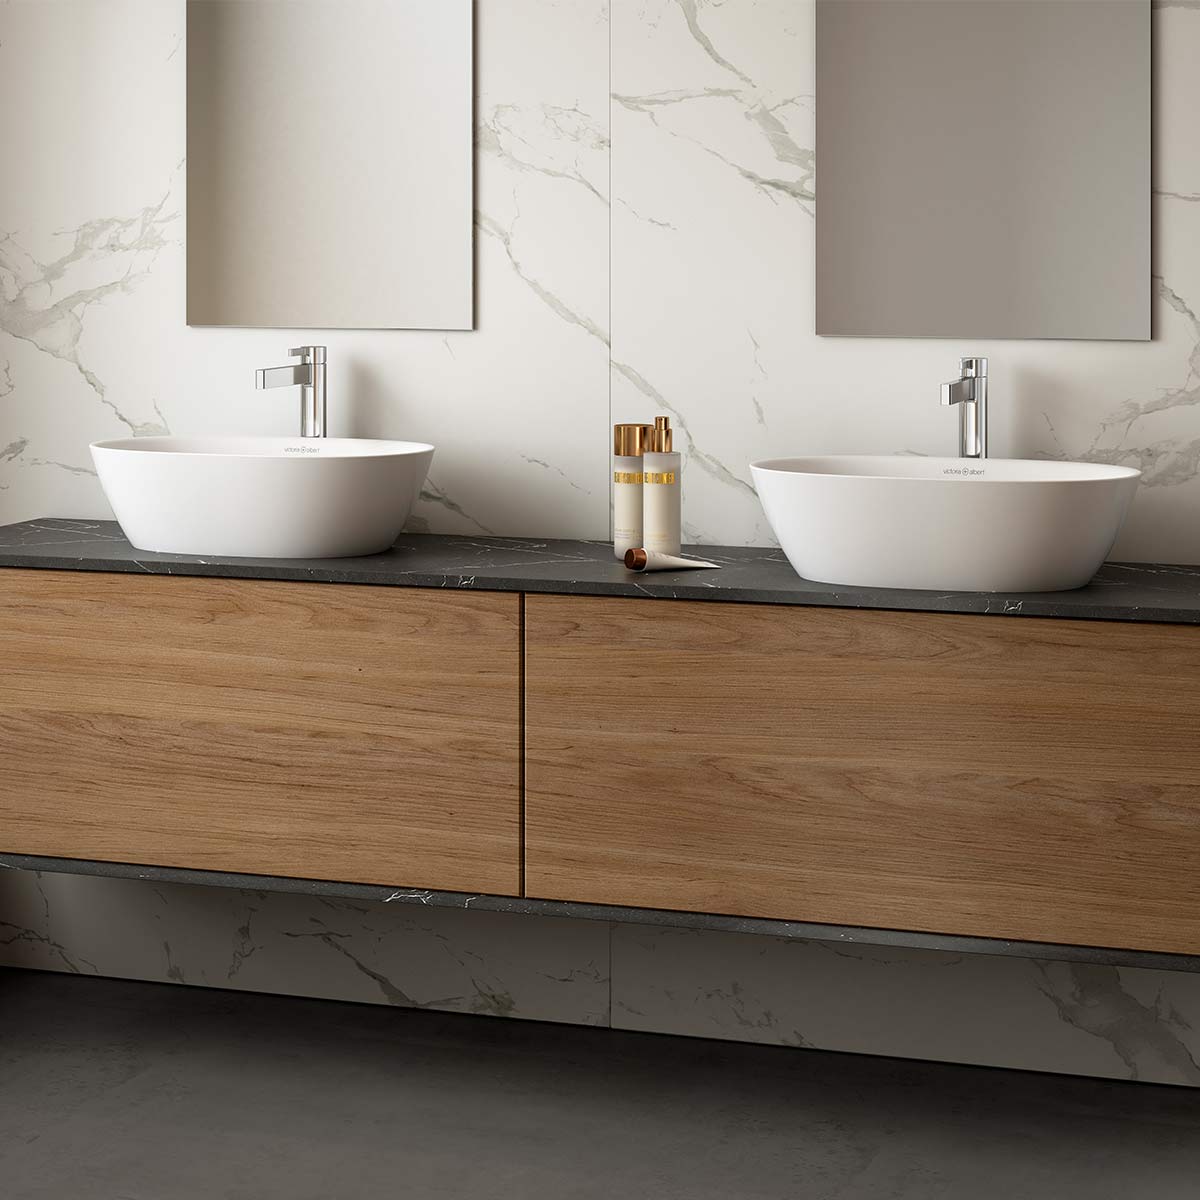 Victoria + Albert Lussari 55 basin in gloss white. Also available in matt white or custom colour exterior paint in any matt or gloss colour. Distributed in Australia by Luxe by Design, Brisbane.